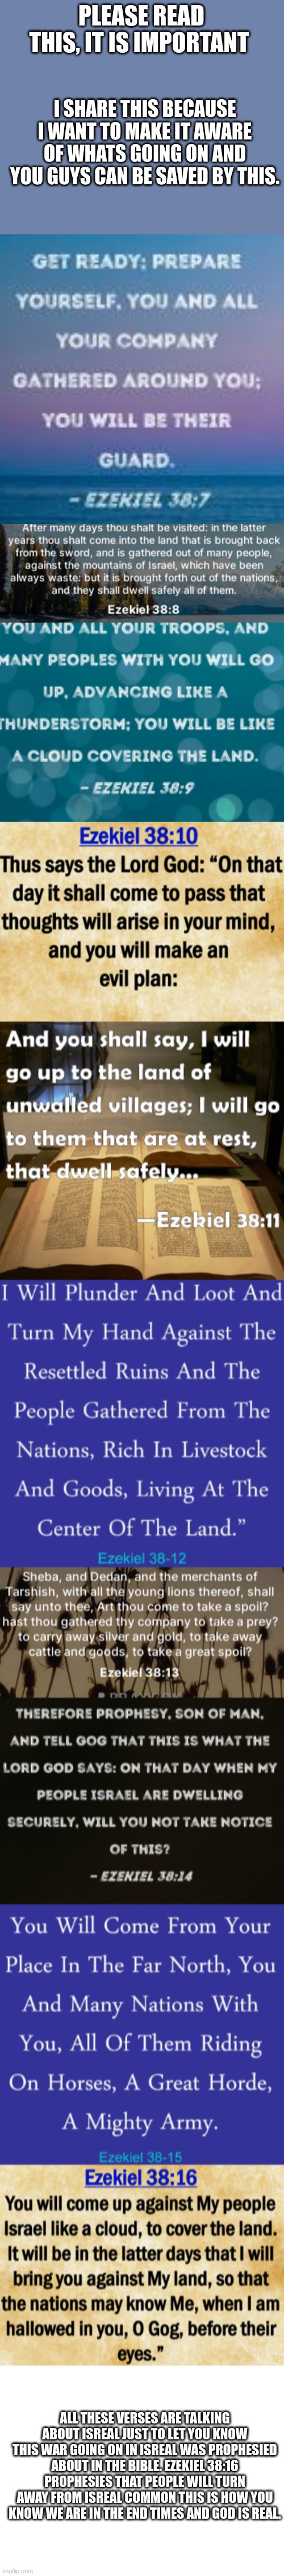 IMPORTANT!! | PLEASE READ THIS, IT IS IMPORTANT; I SHARE THIS BECAUSE I WANT TO MAKE IT AWARE OF WHATS GOING ON AND YOU GUYS CAN BE SAVED BY THIS. ALL THESE VERSES ARE TALKING ABOUT ISREAL JUST TO LET YOU KNOW THIS WAR GOING ON IN ISREAL WAS PROPHESIED ABOUT IN THE BIBLE. EZEKIEL 38:16 PROPHESIES THAT PEOPLE WILL TURN AWAY FROM ISREAL COMMON THIS IS HOW YOU KNOW WE ARE IN THE END TIMES AND GOD IS REAL. | image tagged in final days,verses,god is real,pray for isreal,turn to god | made w/ Imgflip meme maker